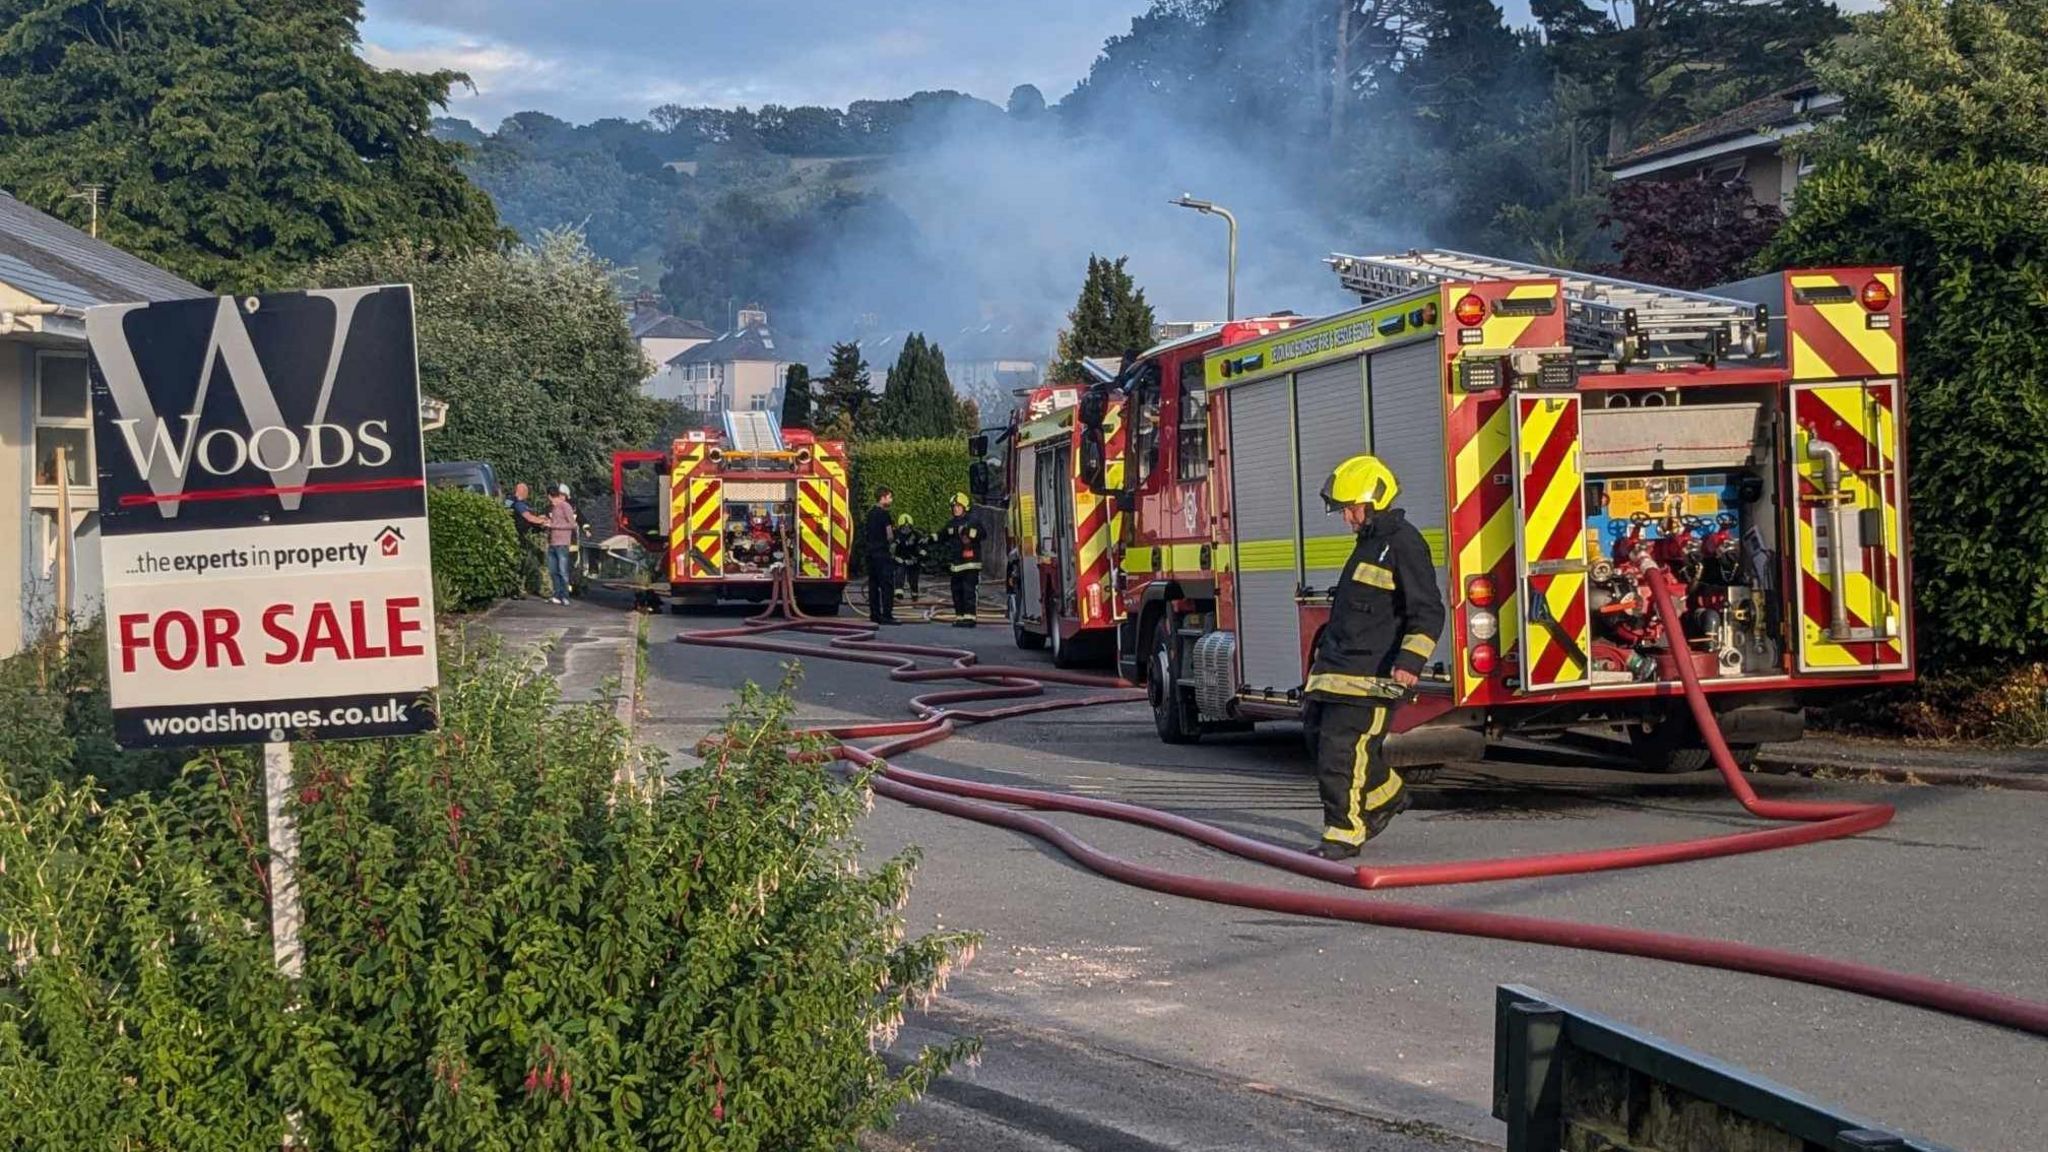 Fire engines and firefighters on the scene of a fire which broke out at a bungalow in Totnes, with smoke seen behind the fire engines